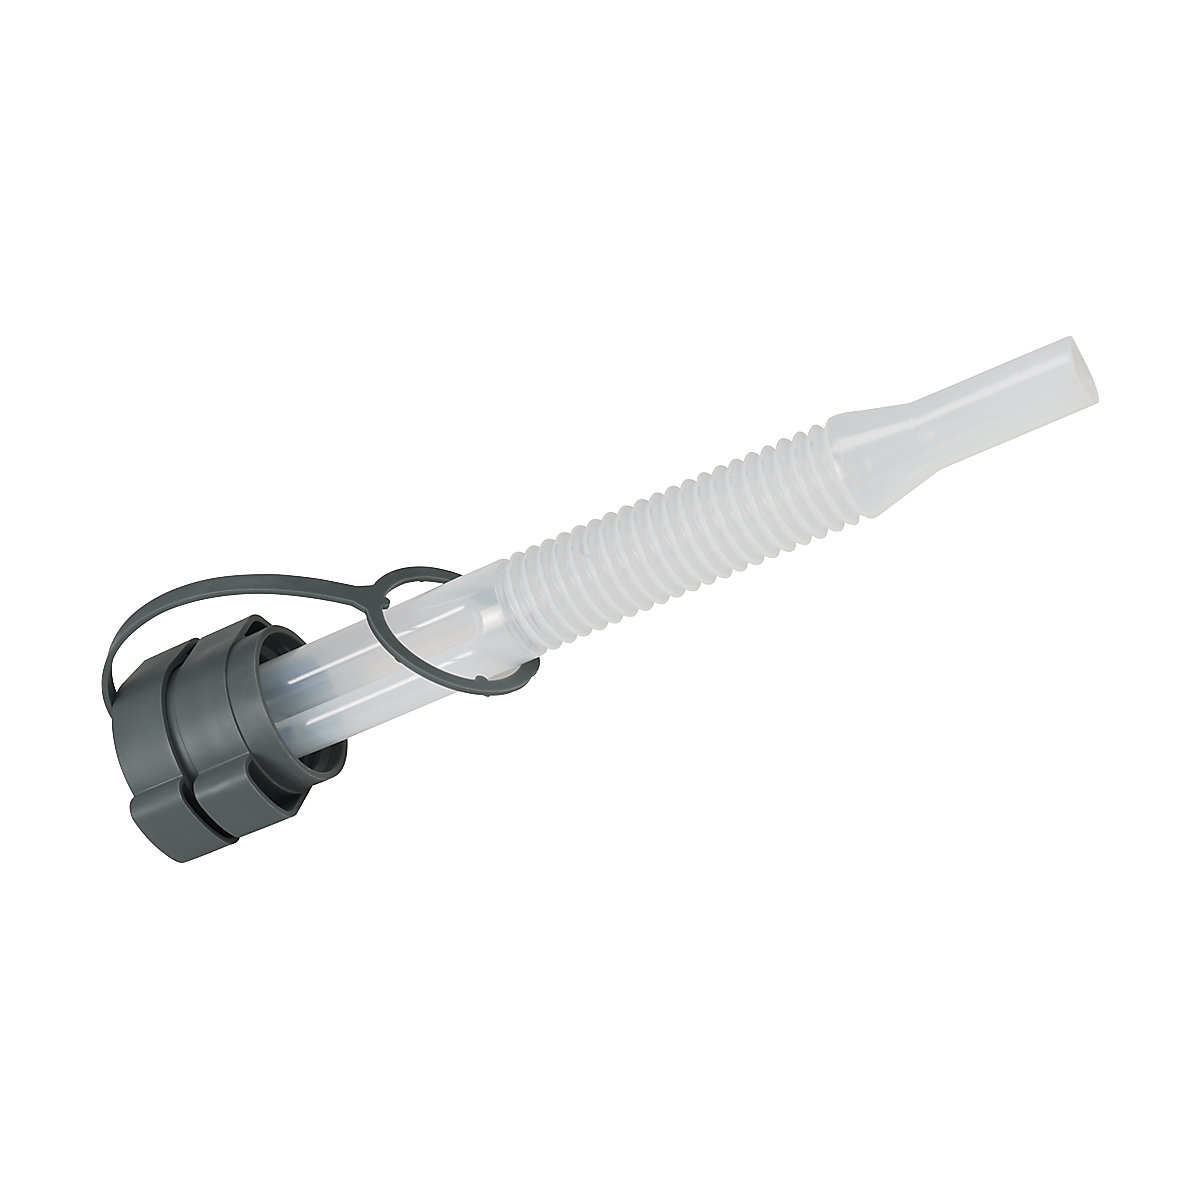 Flexible outlet pipe with screw cap - PRESSOL